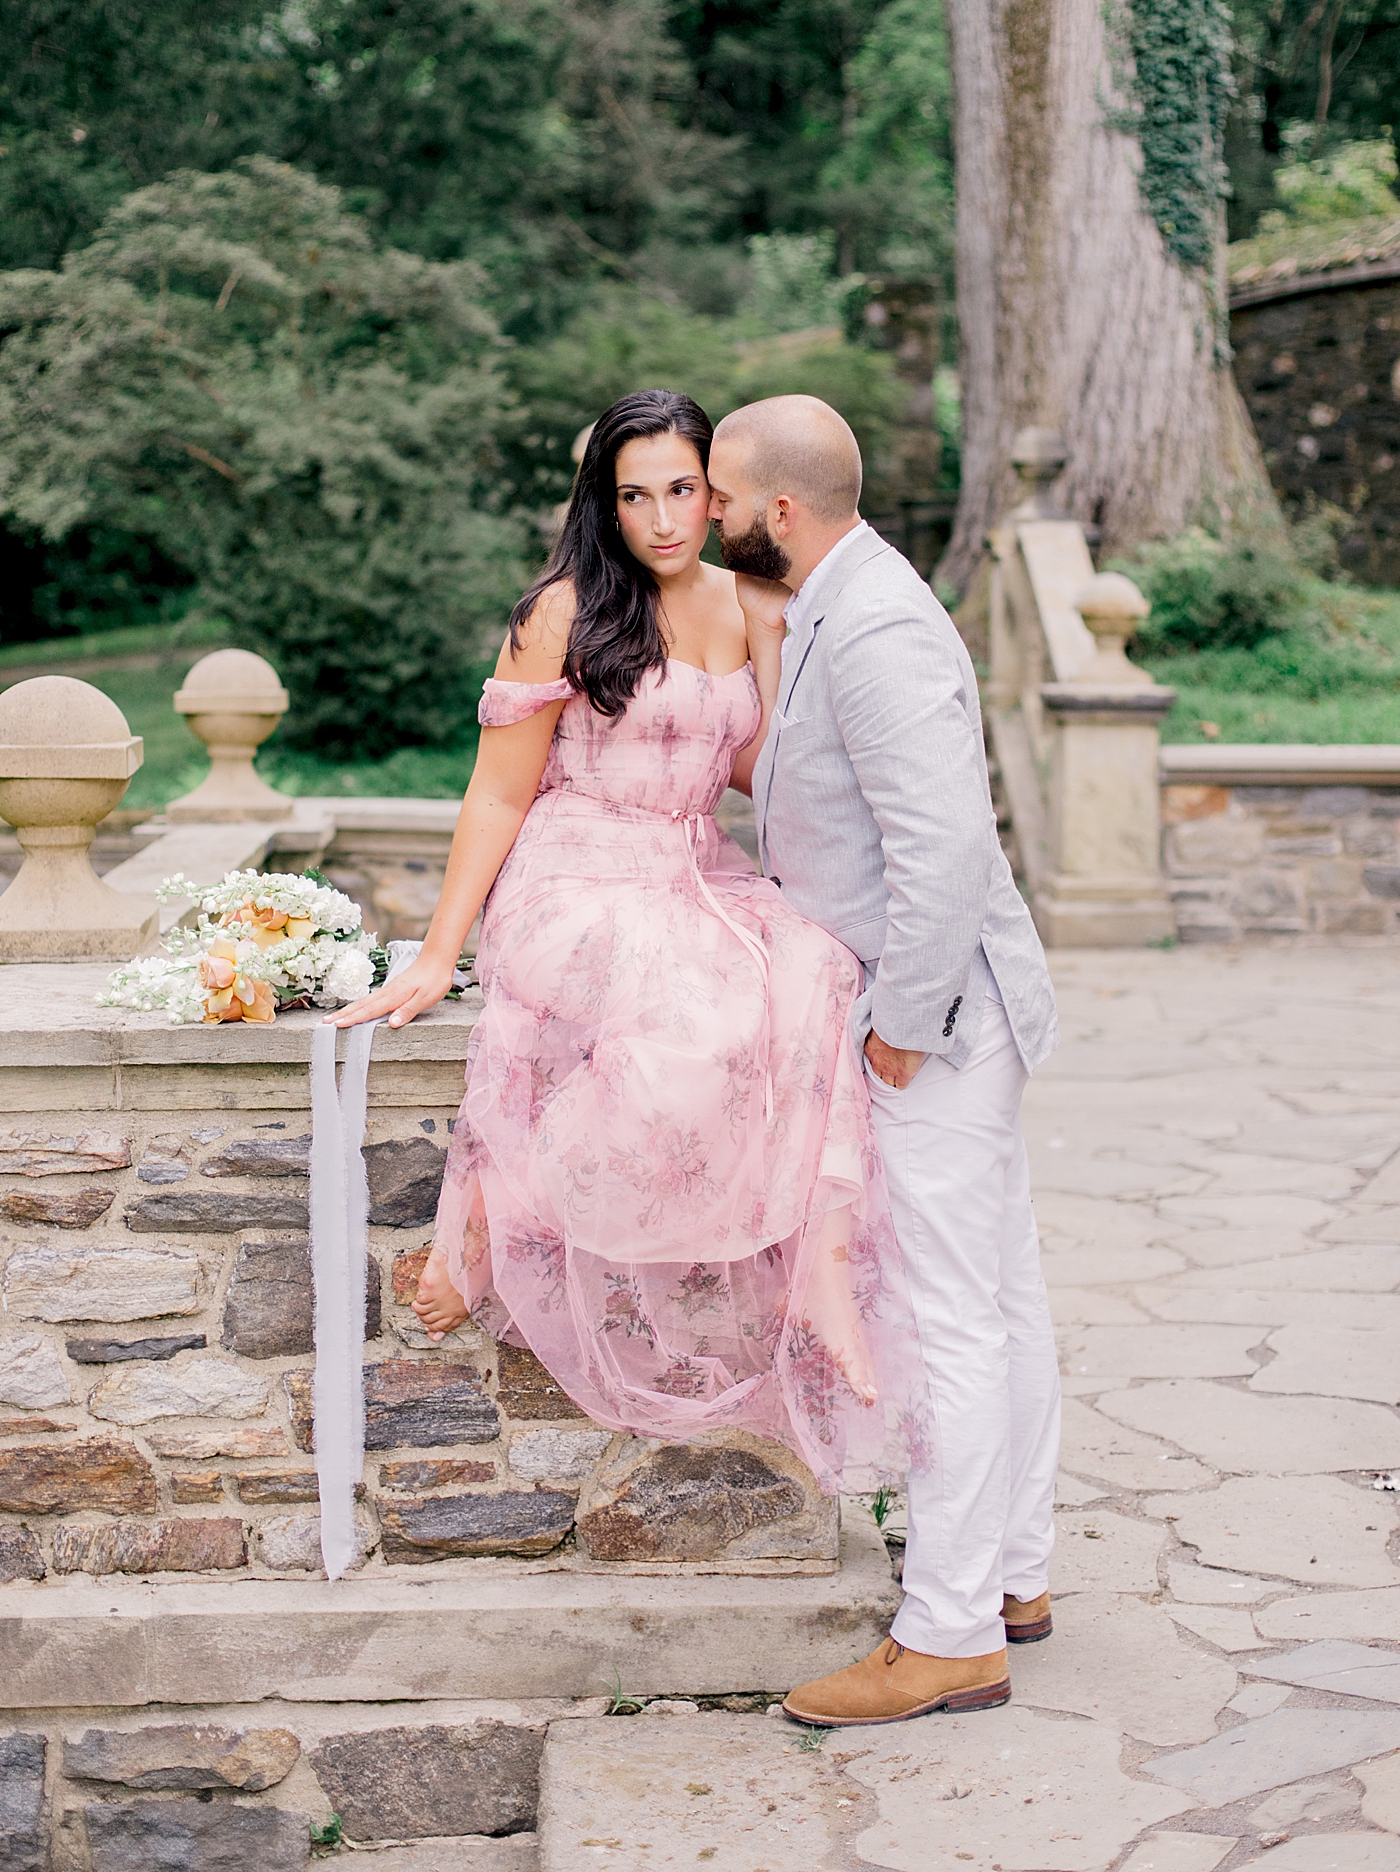 Couple snuggling sitting near a stone wall | Styling and Planning Engagement Sessions with Hope Helmuth Photography